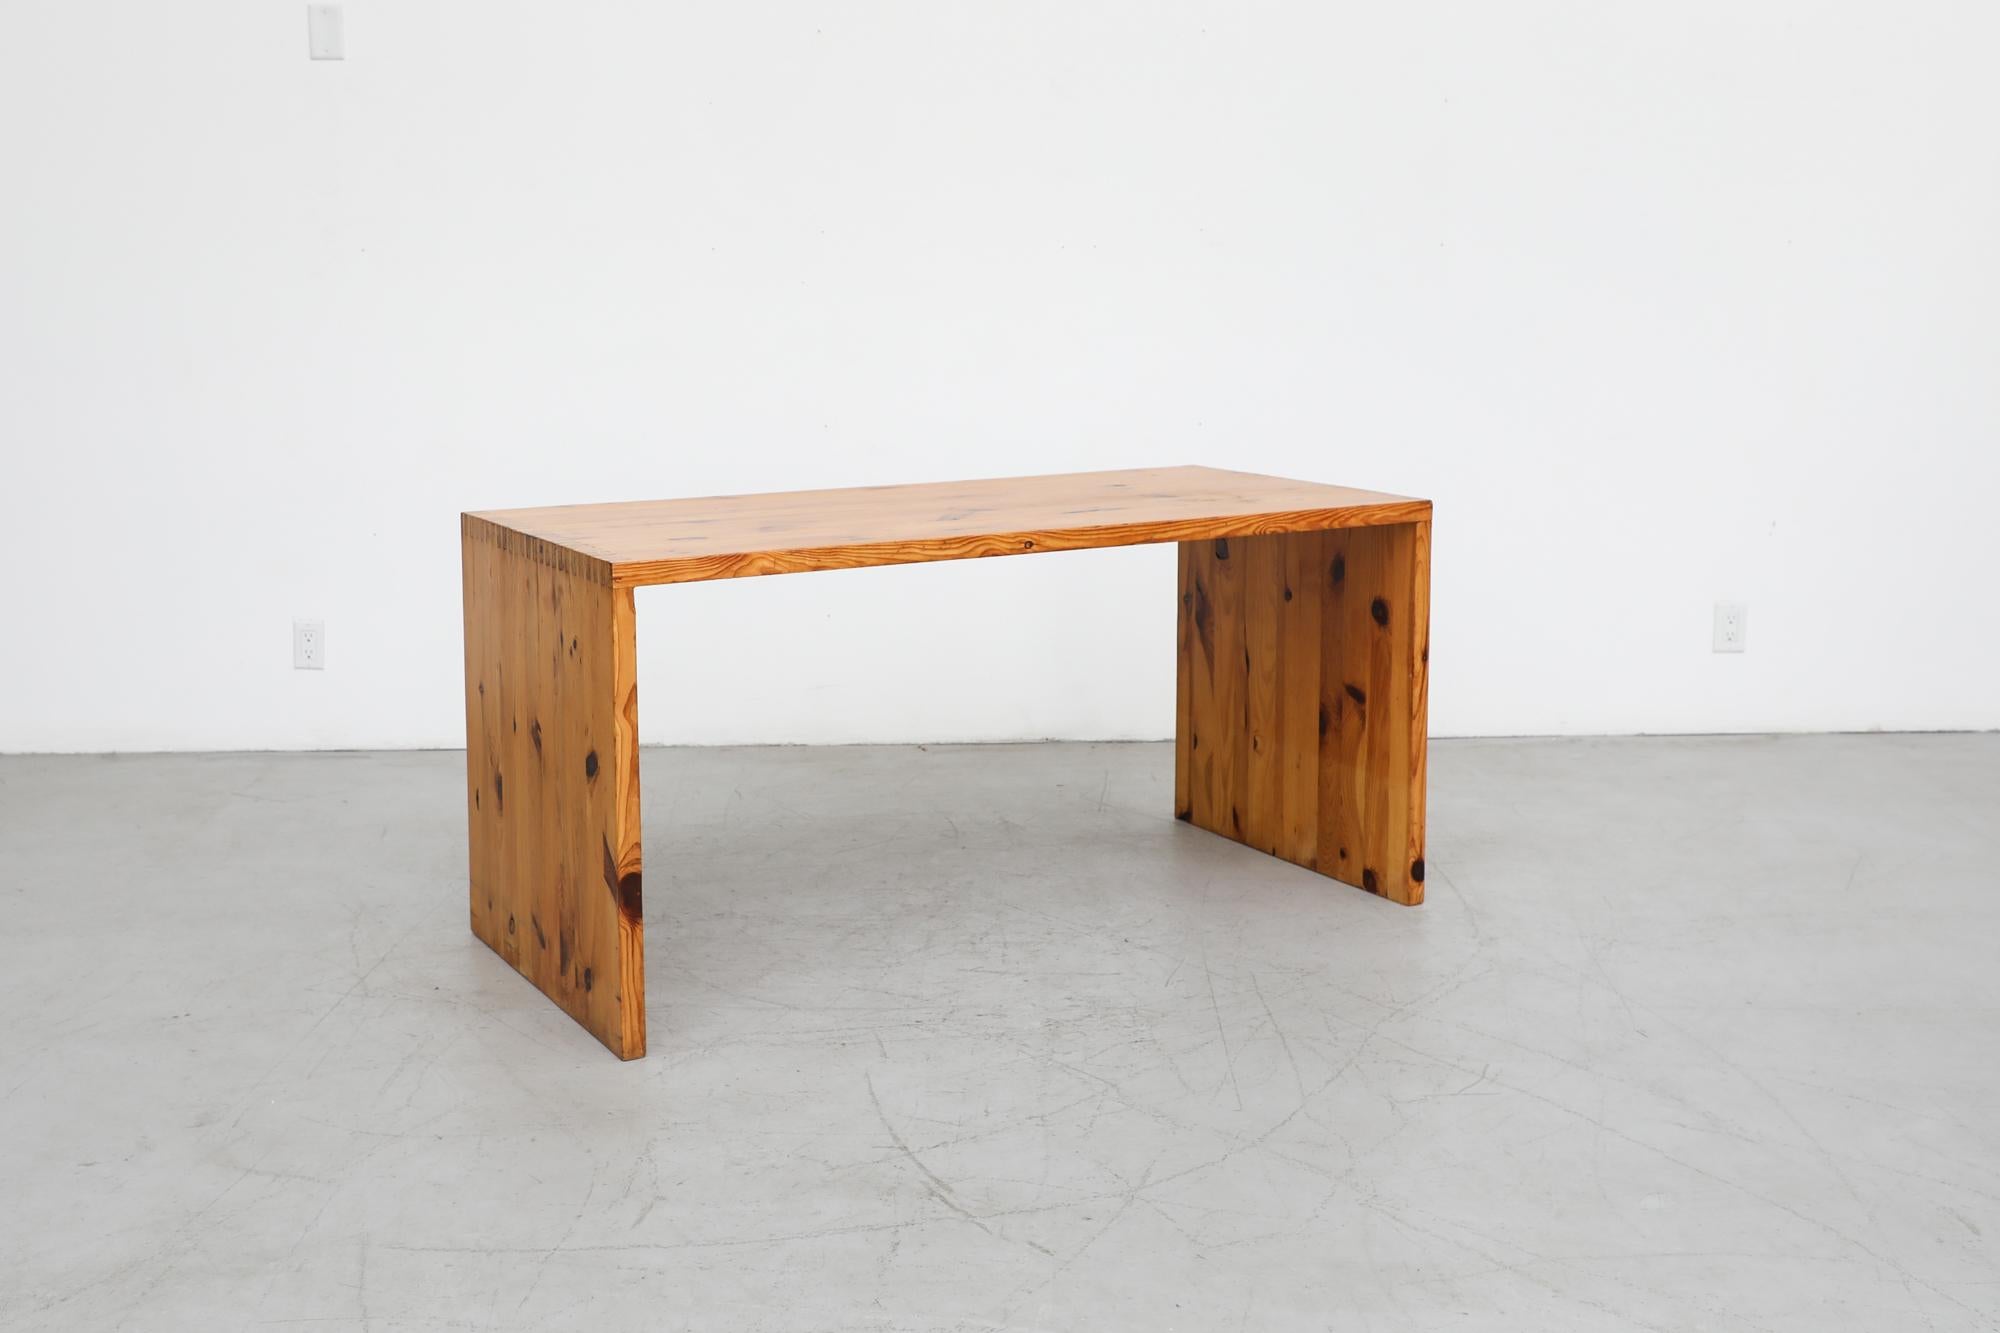 Dutch Ate Van Apeldoorn Style Pine Waterfall Table or Desk w/ Handsome Dovetail Joints For Sale